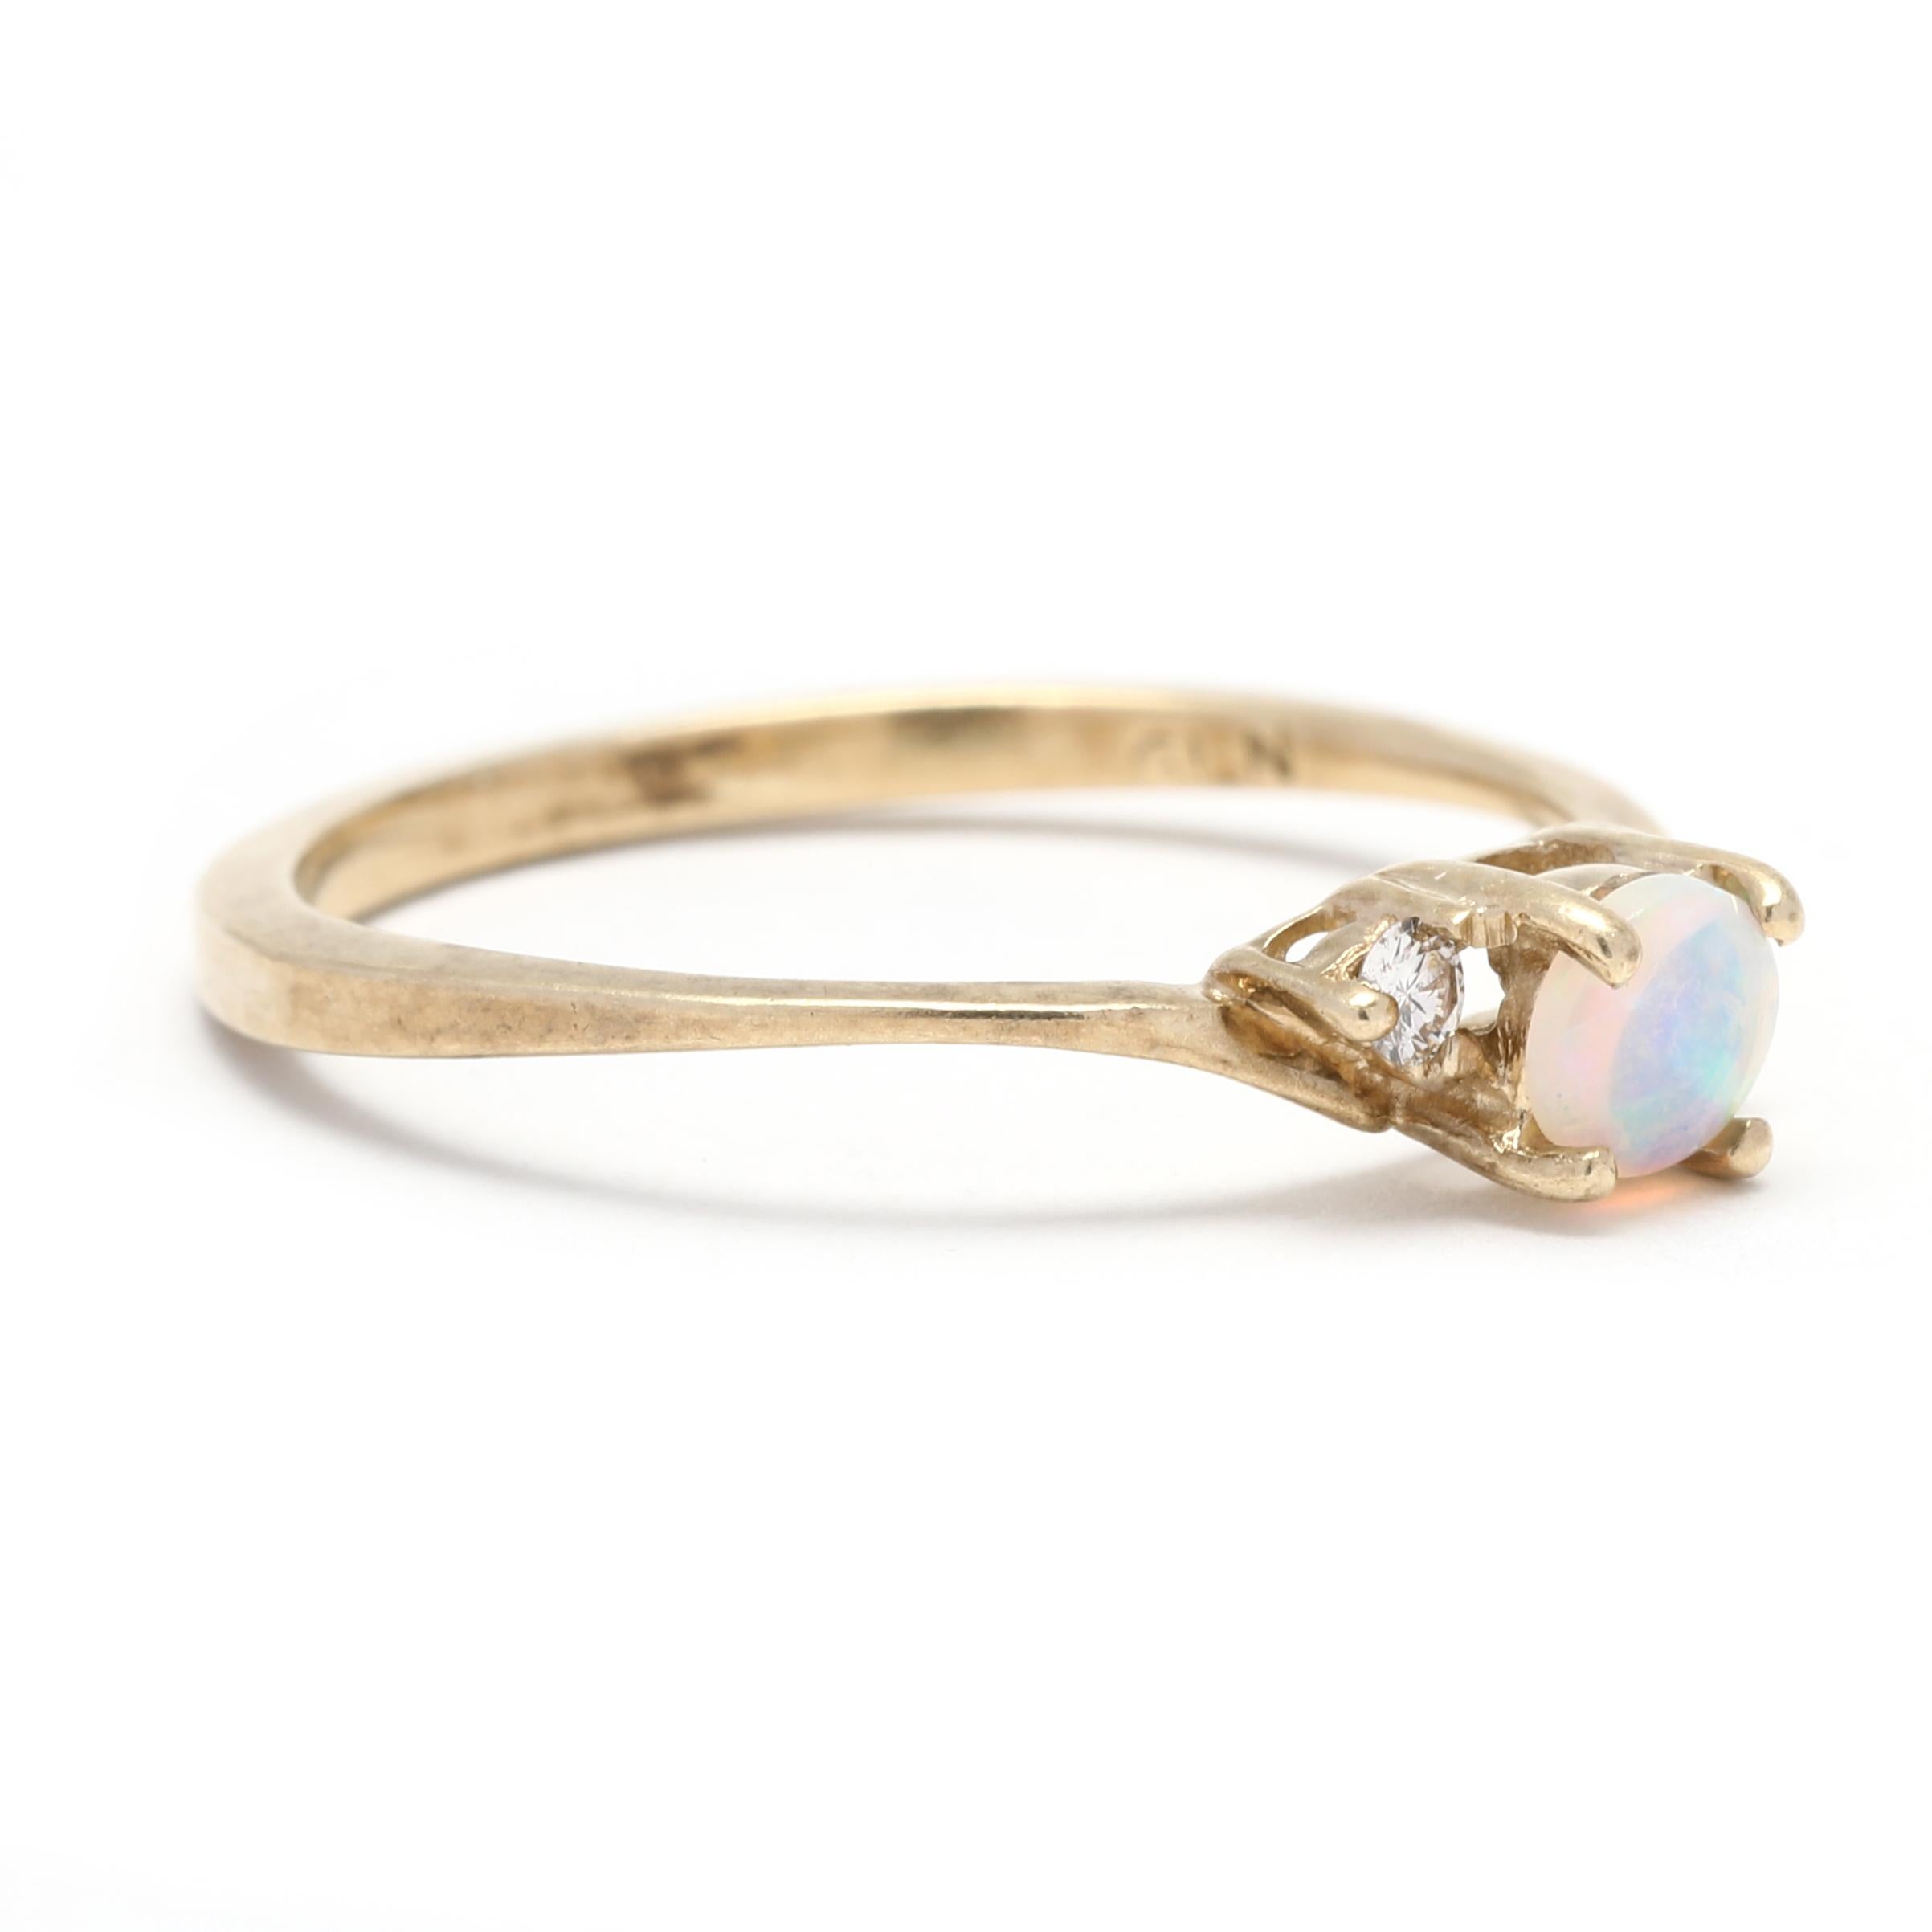 This 0.20ctw Opal Diamond Ring will make a special addition to any jewelry collection. Crafted in 10K yellow gold, this beautiful ring features a petite opal stone surrounded by a halo of sparkling diamonds. The bypass design of this small opal ring